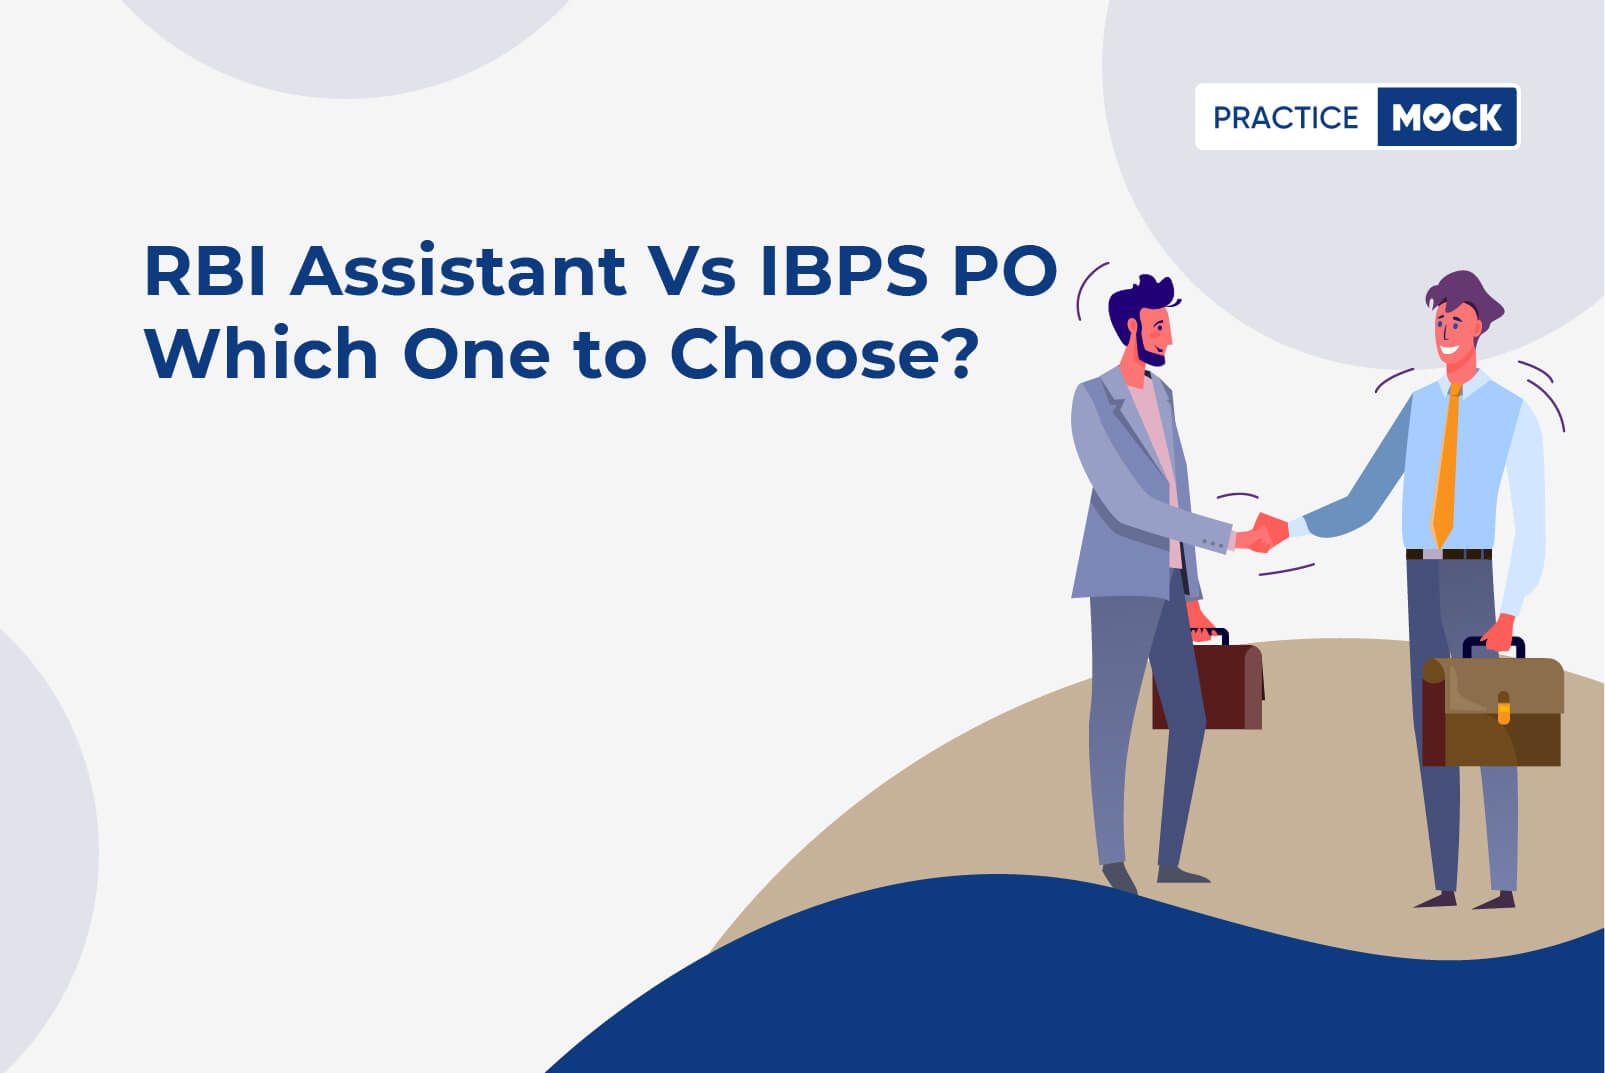 RBI Assistant Vs IBPS PO -Which one to choose?